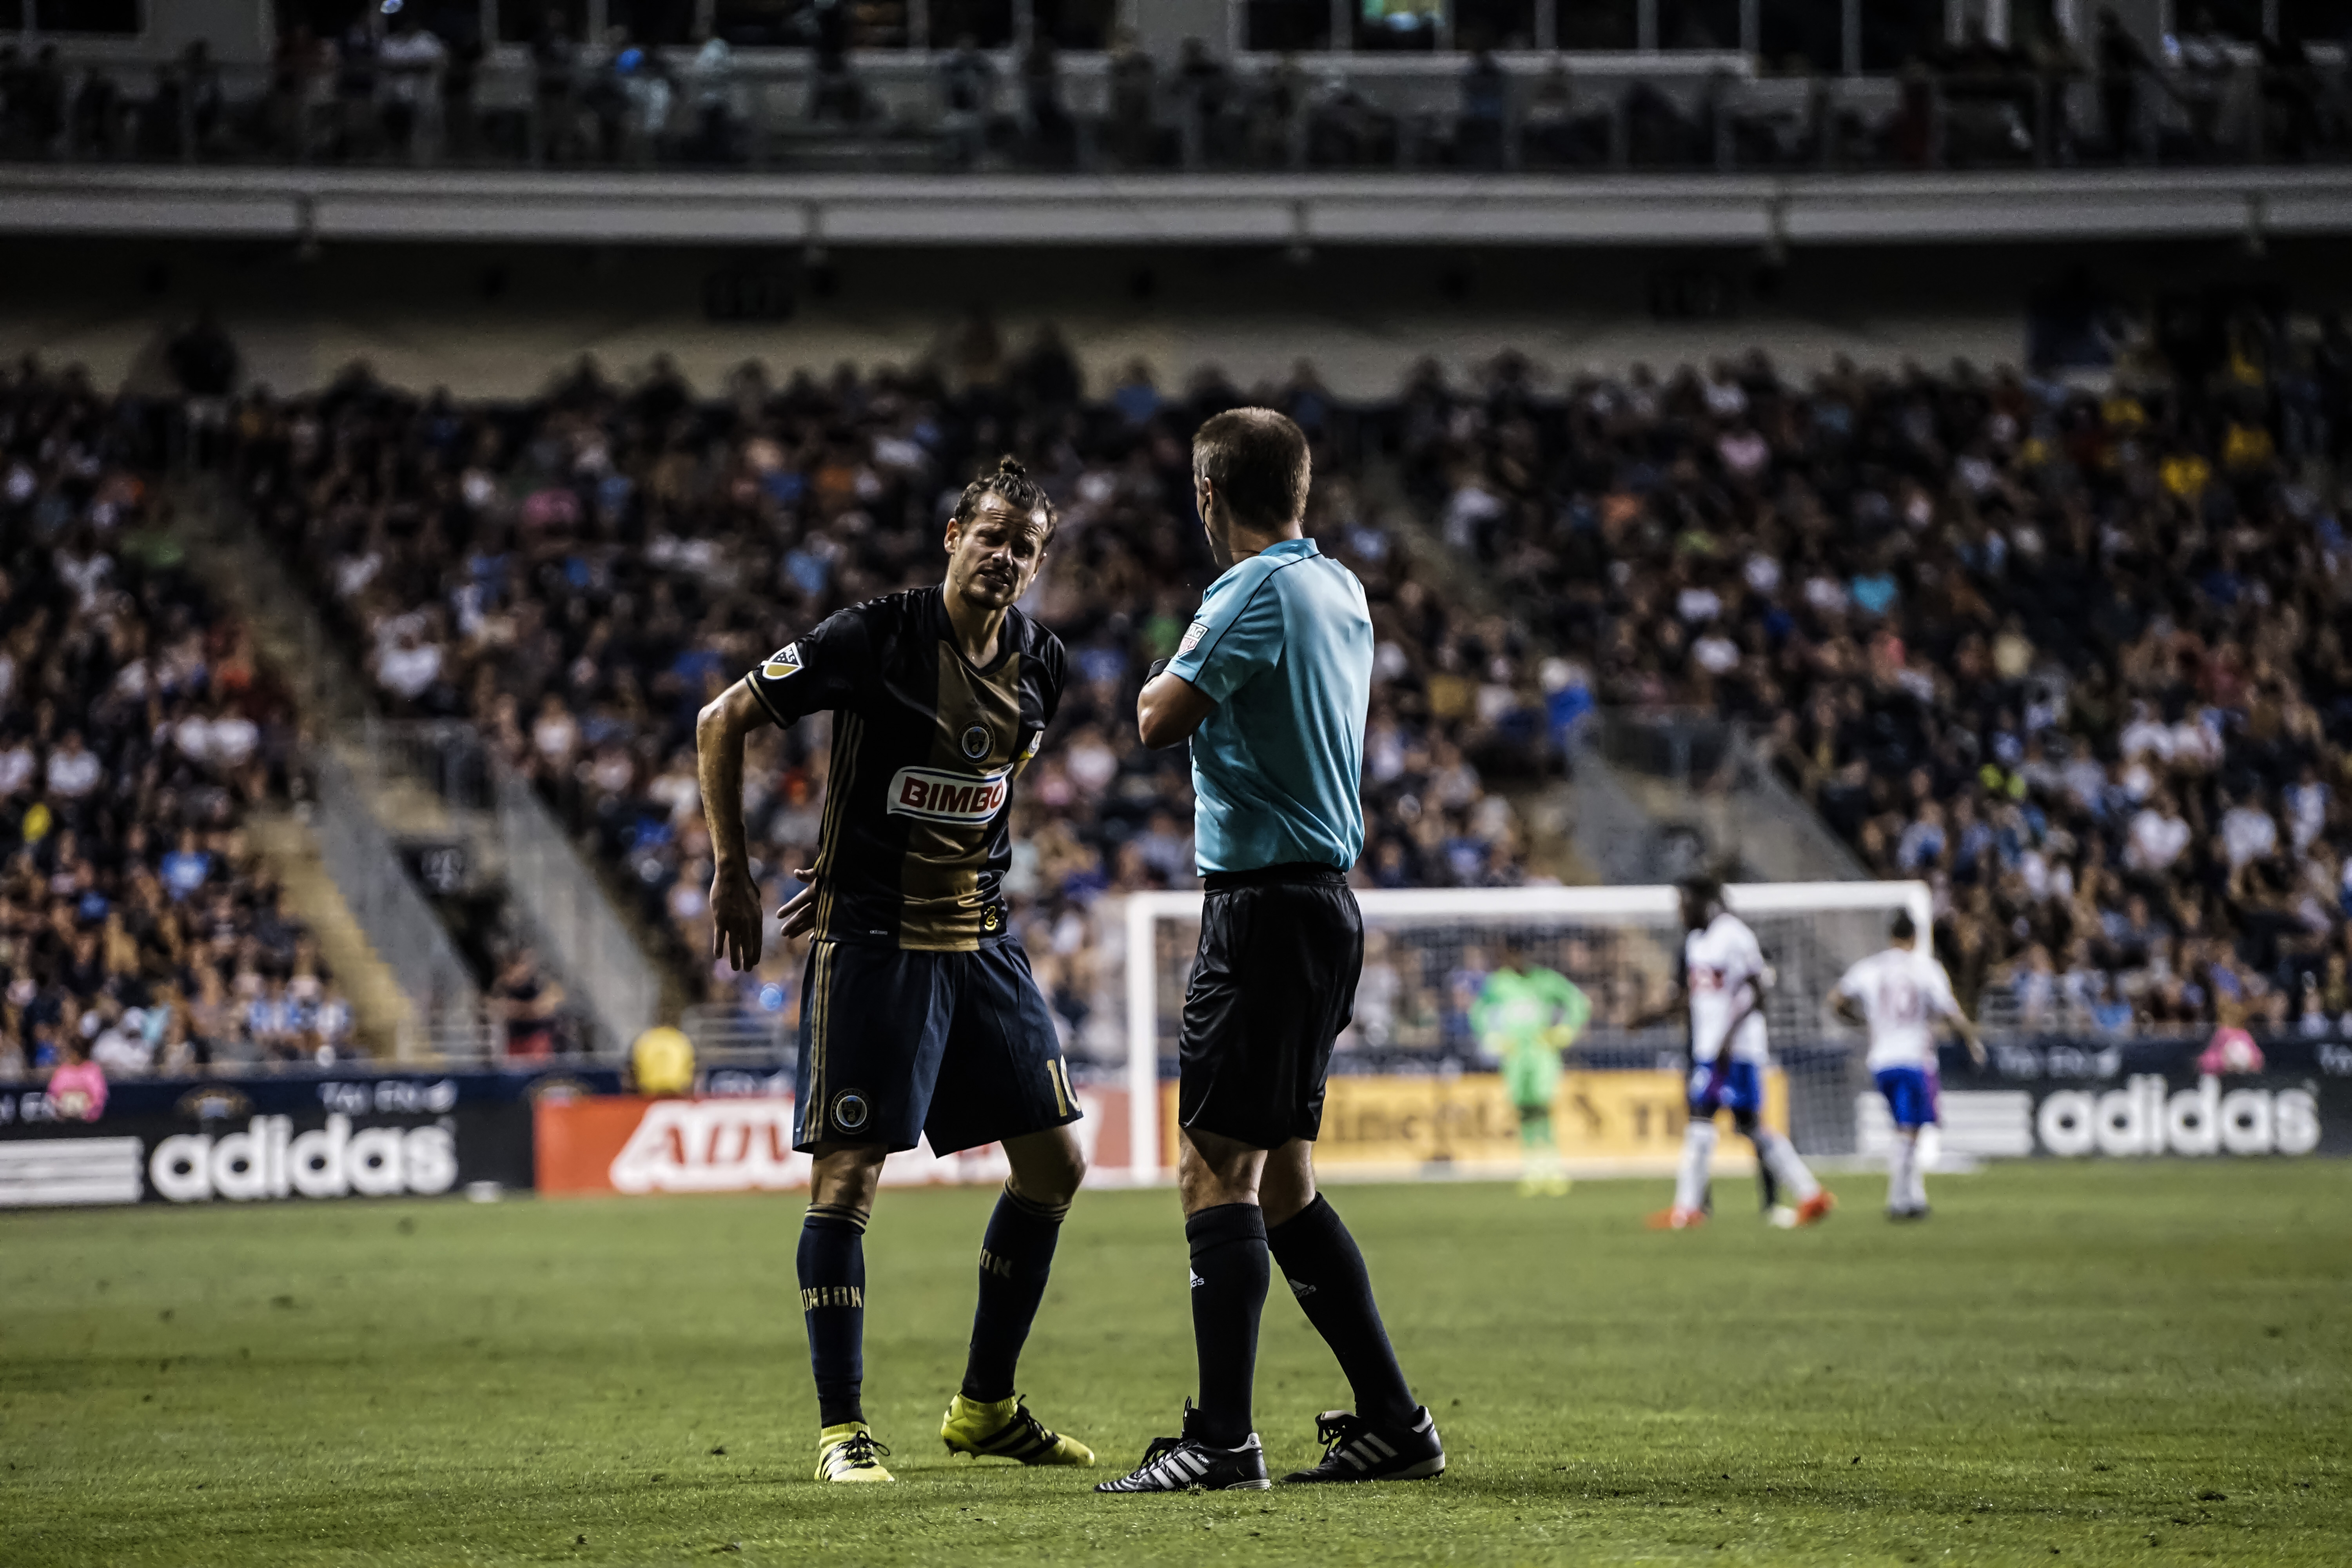 Tranquillo Barnetta argues a call with Mark Geiger during the Philadelphia Union’s match against Toronto FC.